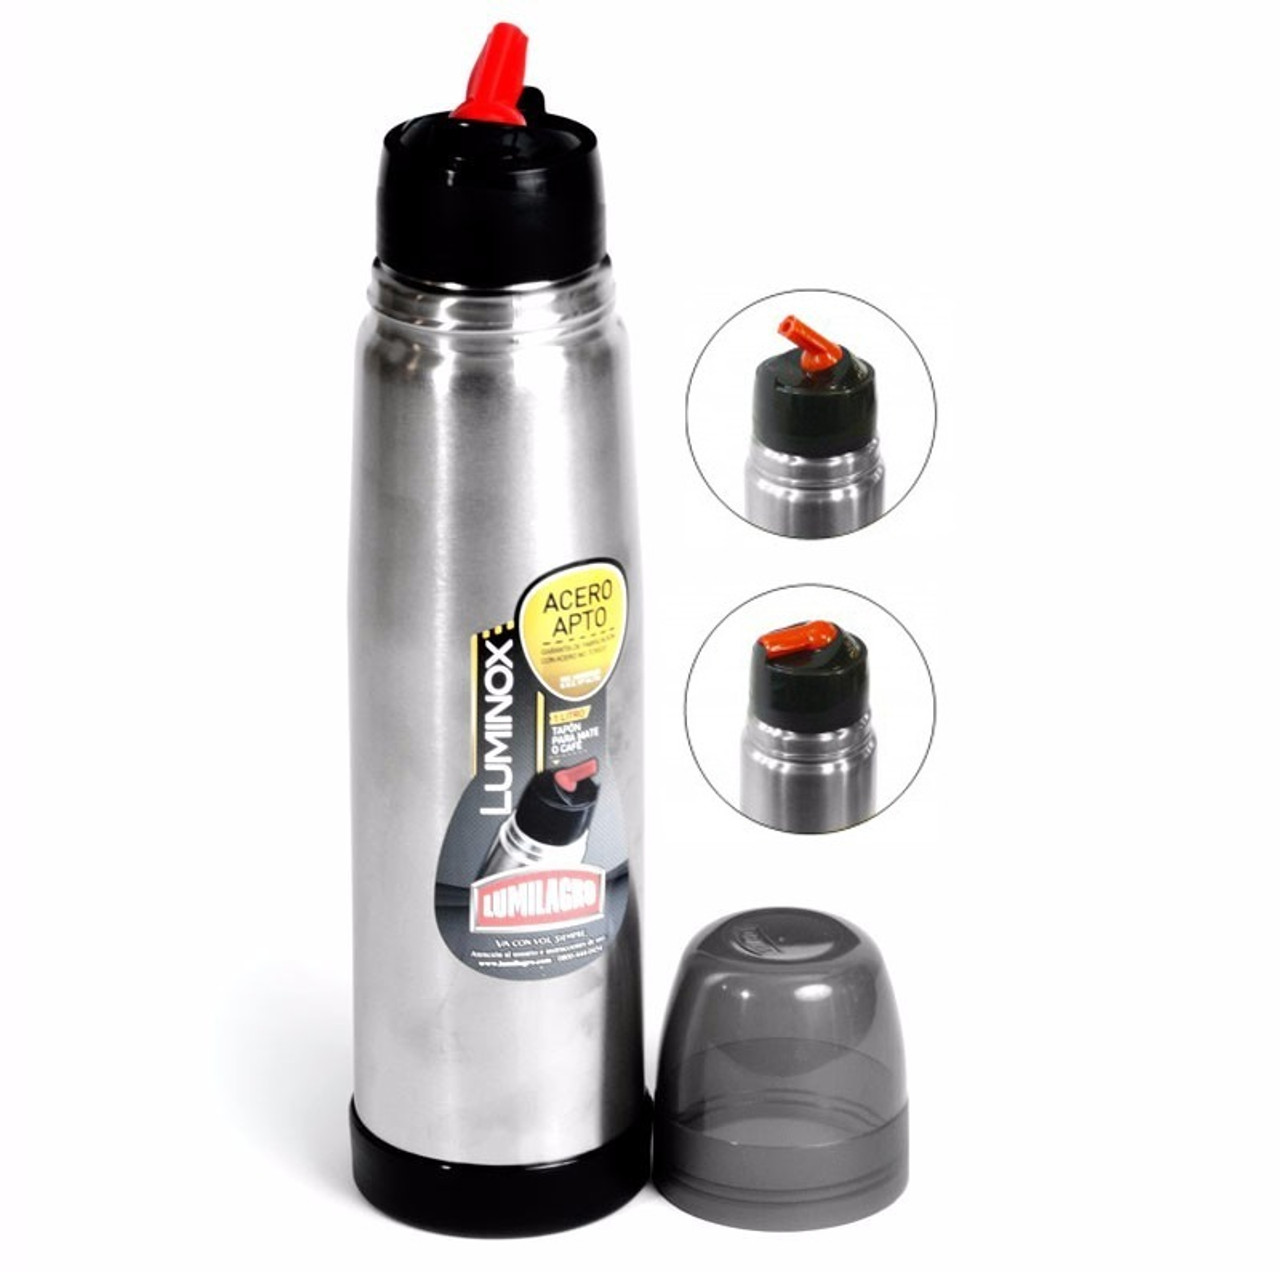 Lumilagro Stainless Steel Thermos Vacuum Bottle with Pouring Beak